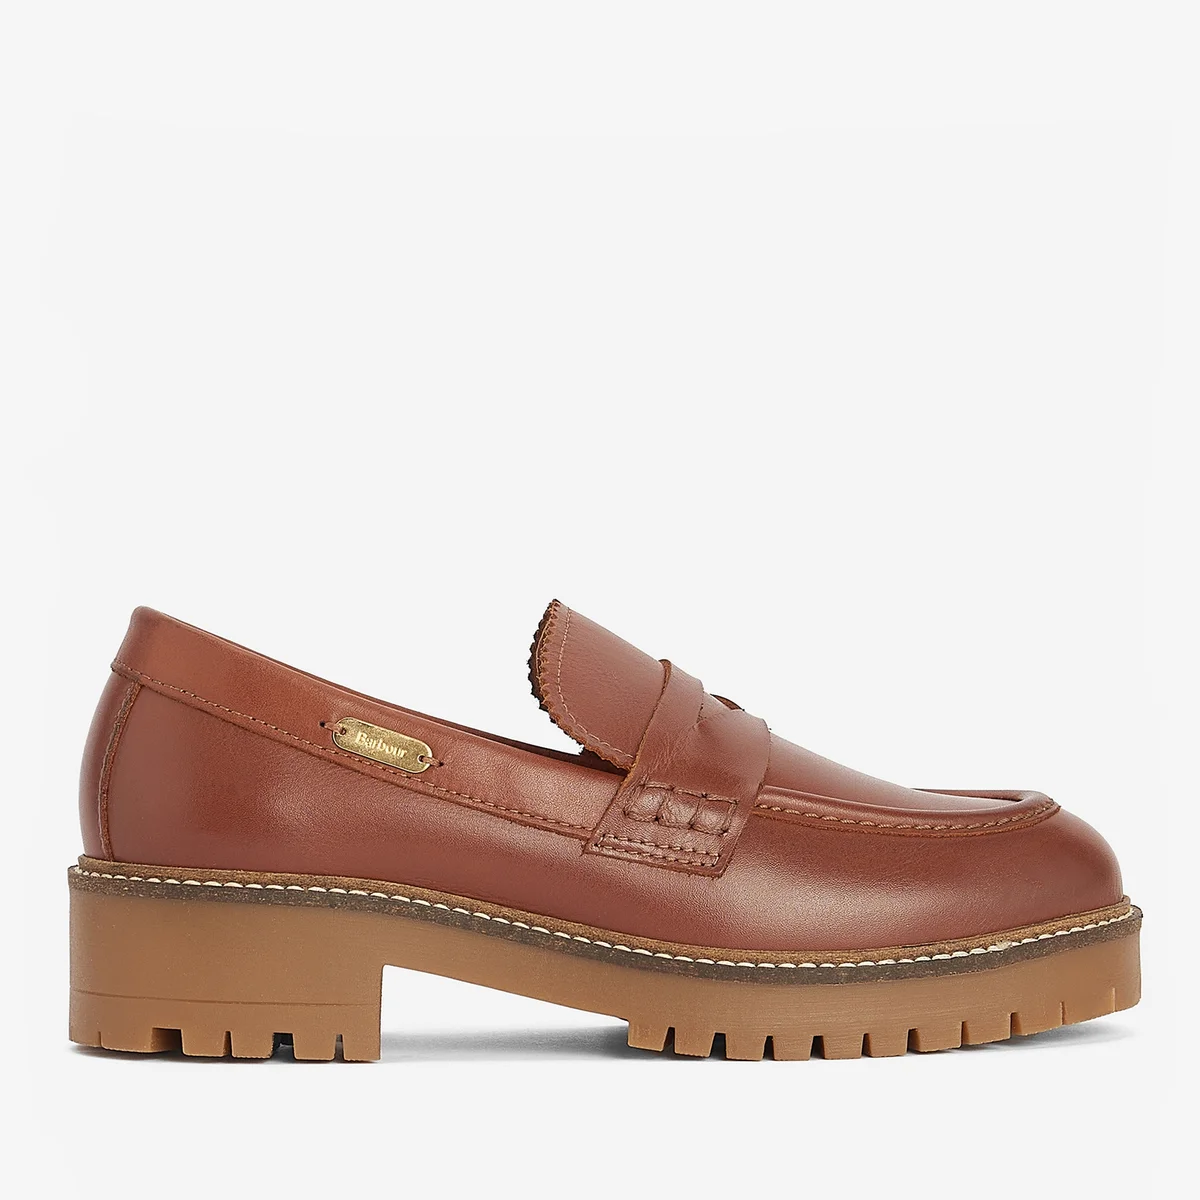 Barbour Women's Norma Leather Loafers Image 1